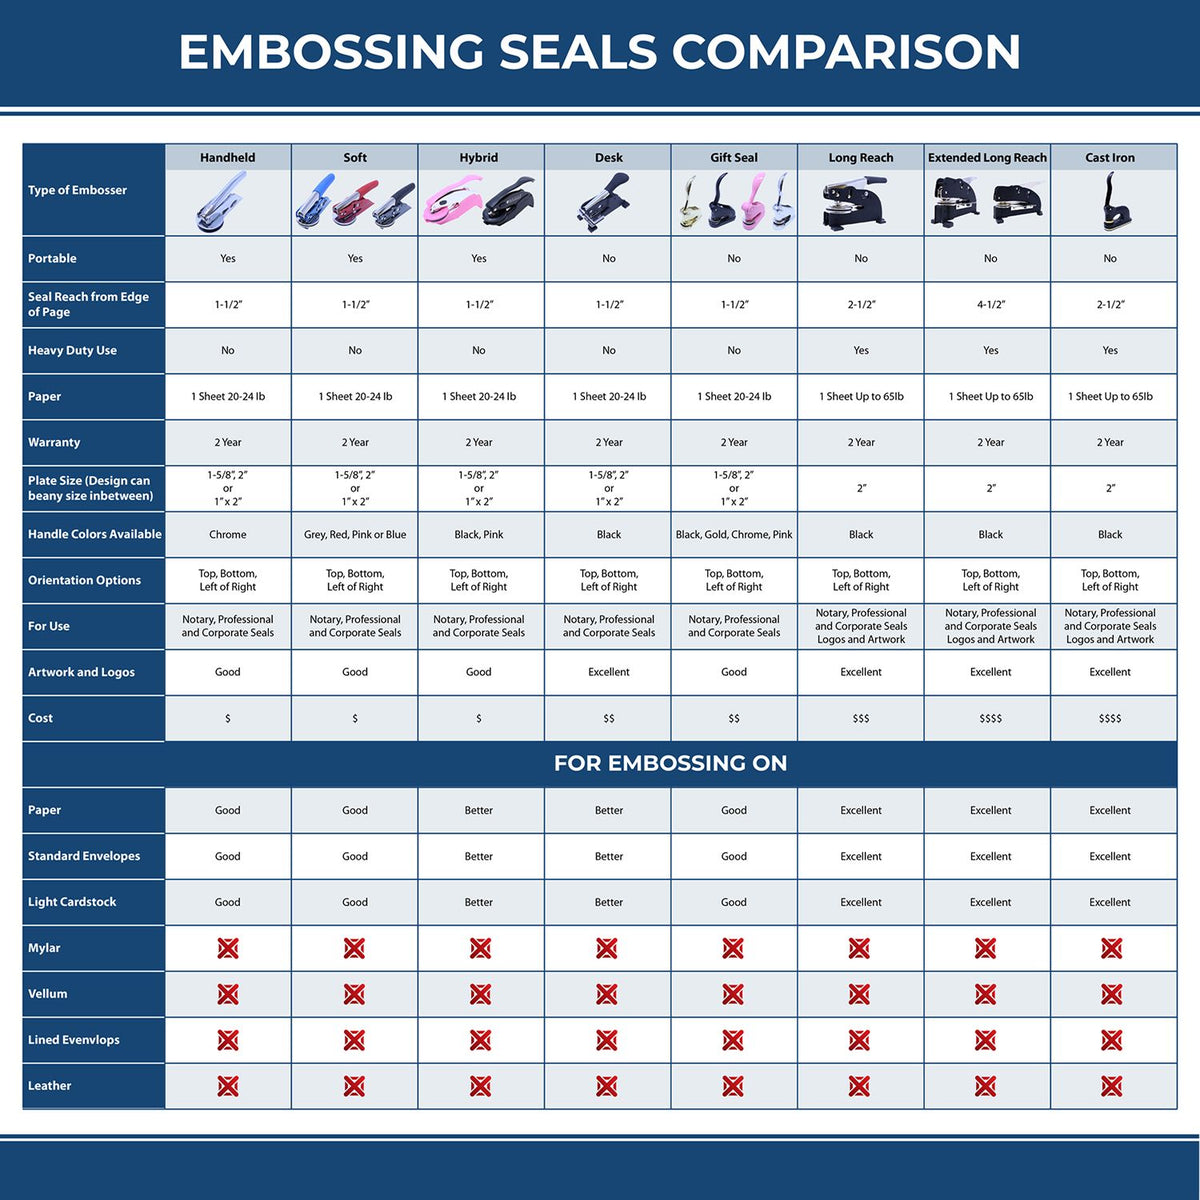 A comparison chart for the different types of mount models available for the Gift Delaware Engineer Seal